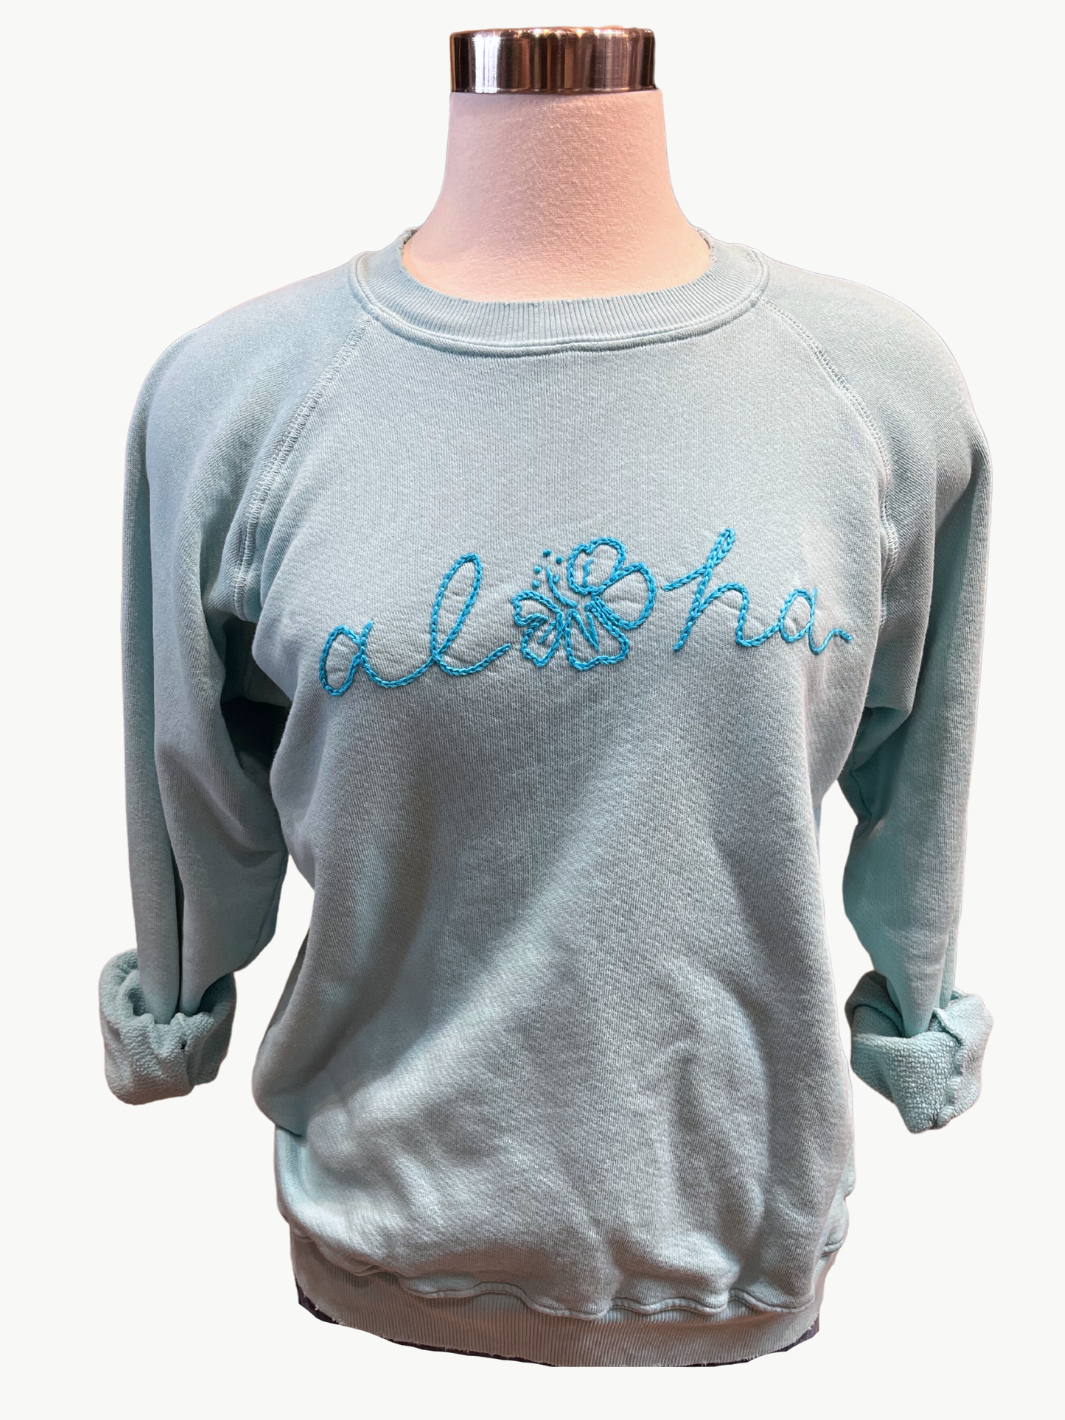 ALOHA IN TURQUOISE - Romi Boutique